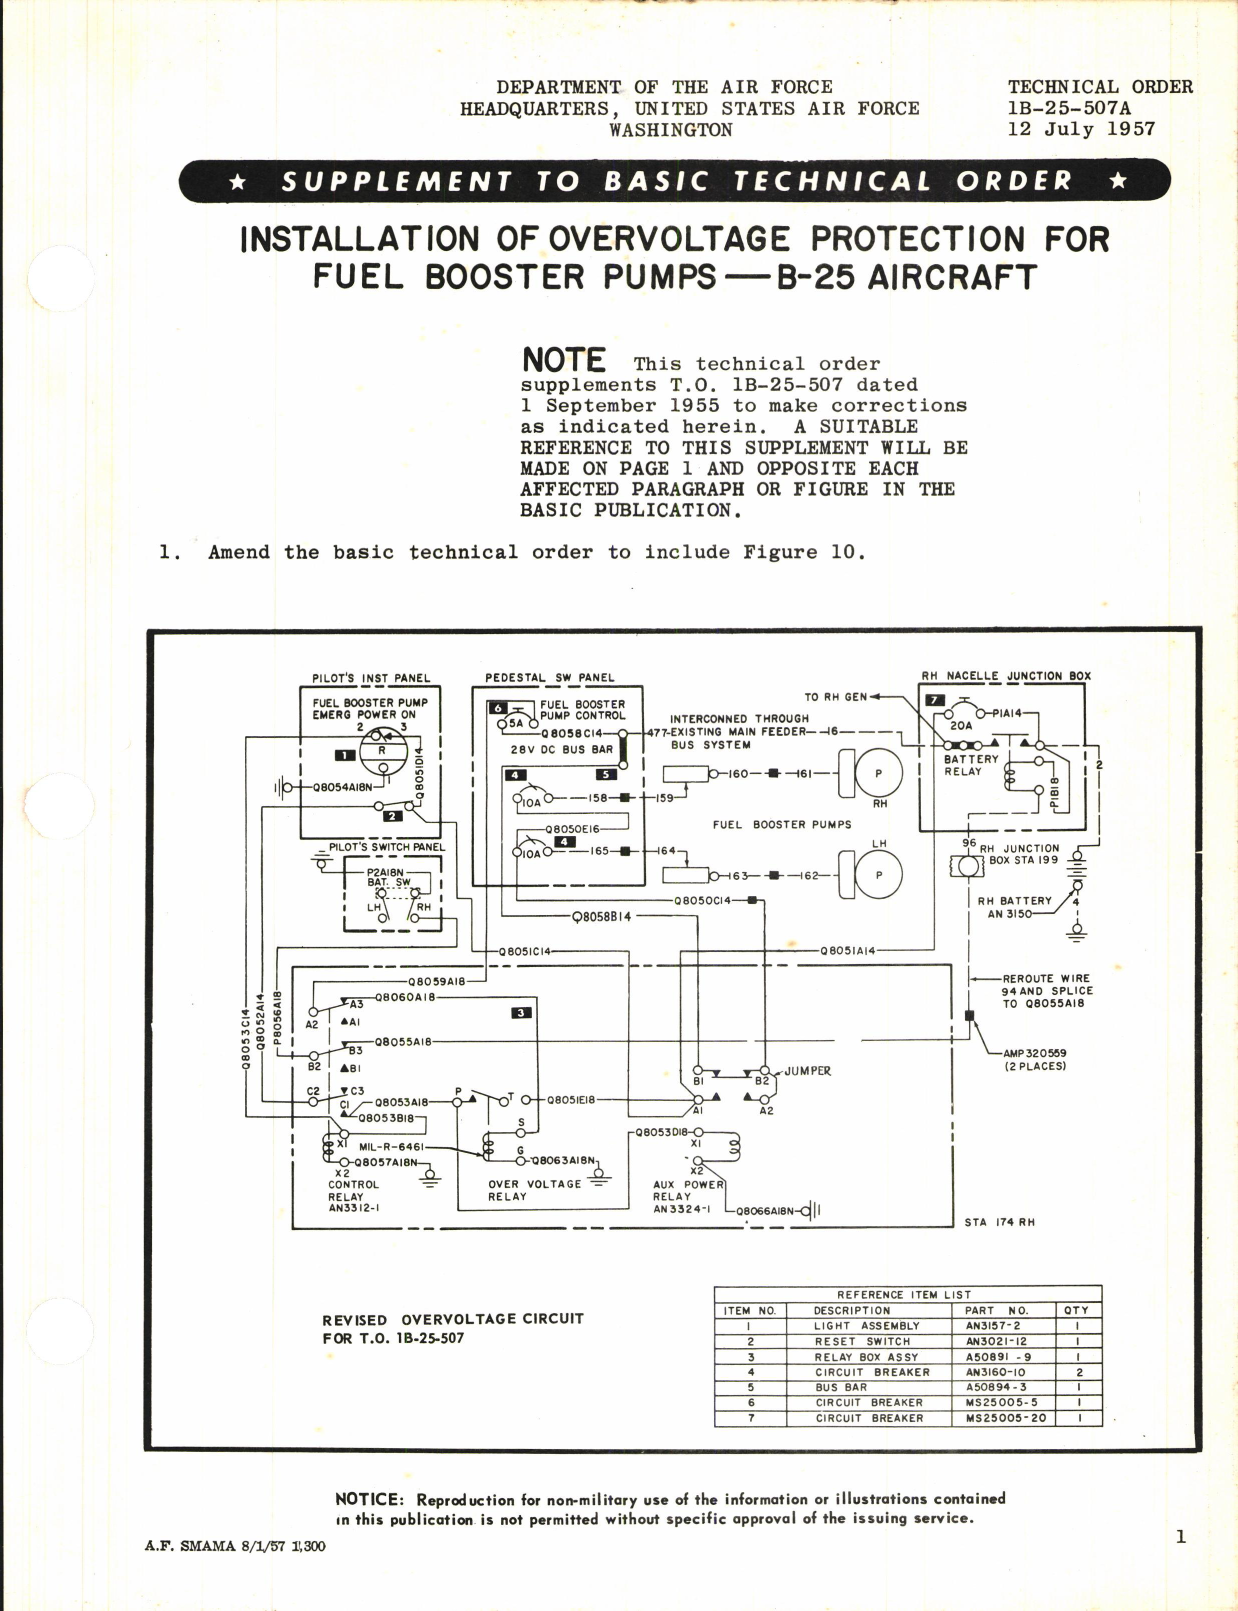 Sample page 1 from AirCorps Library document: Installation of Overvoltage Protection for Fuel Booster Pumps for B-25 Aircraft